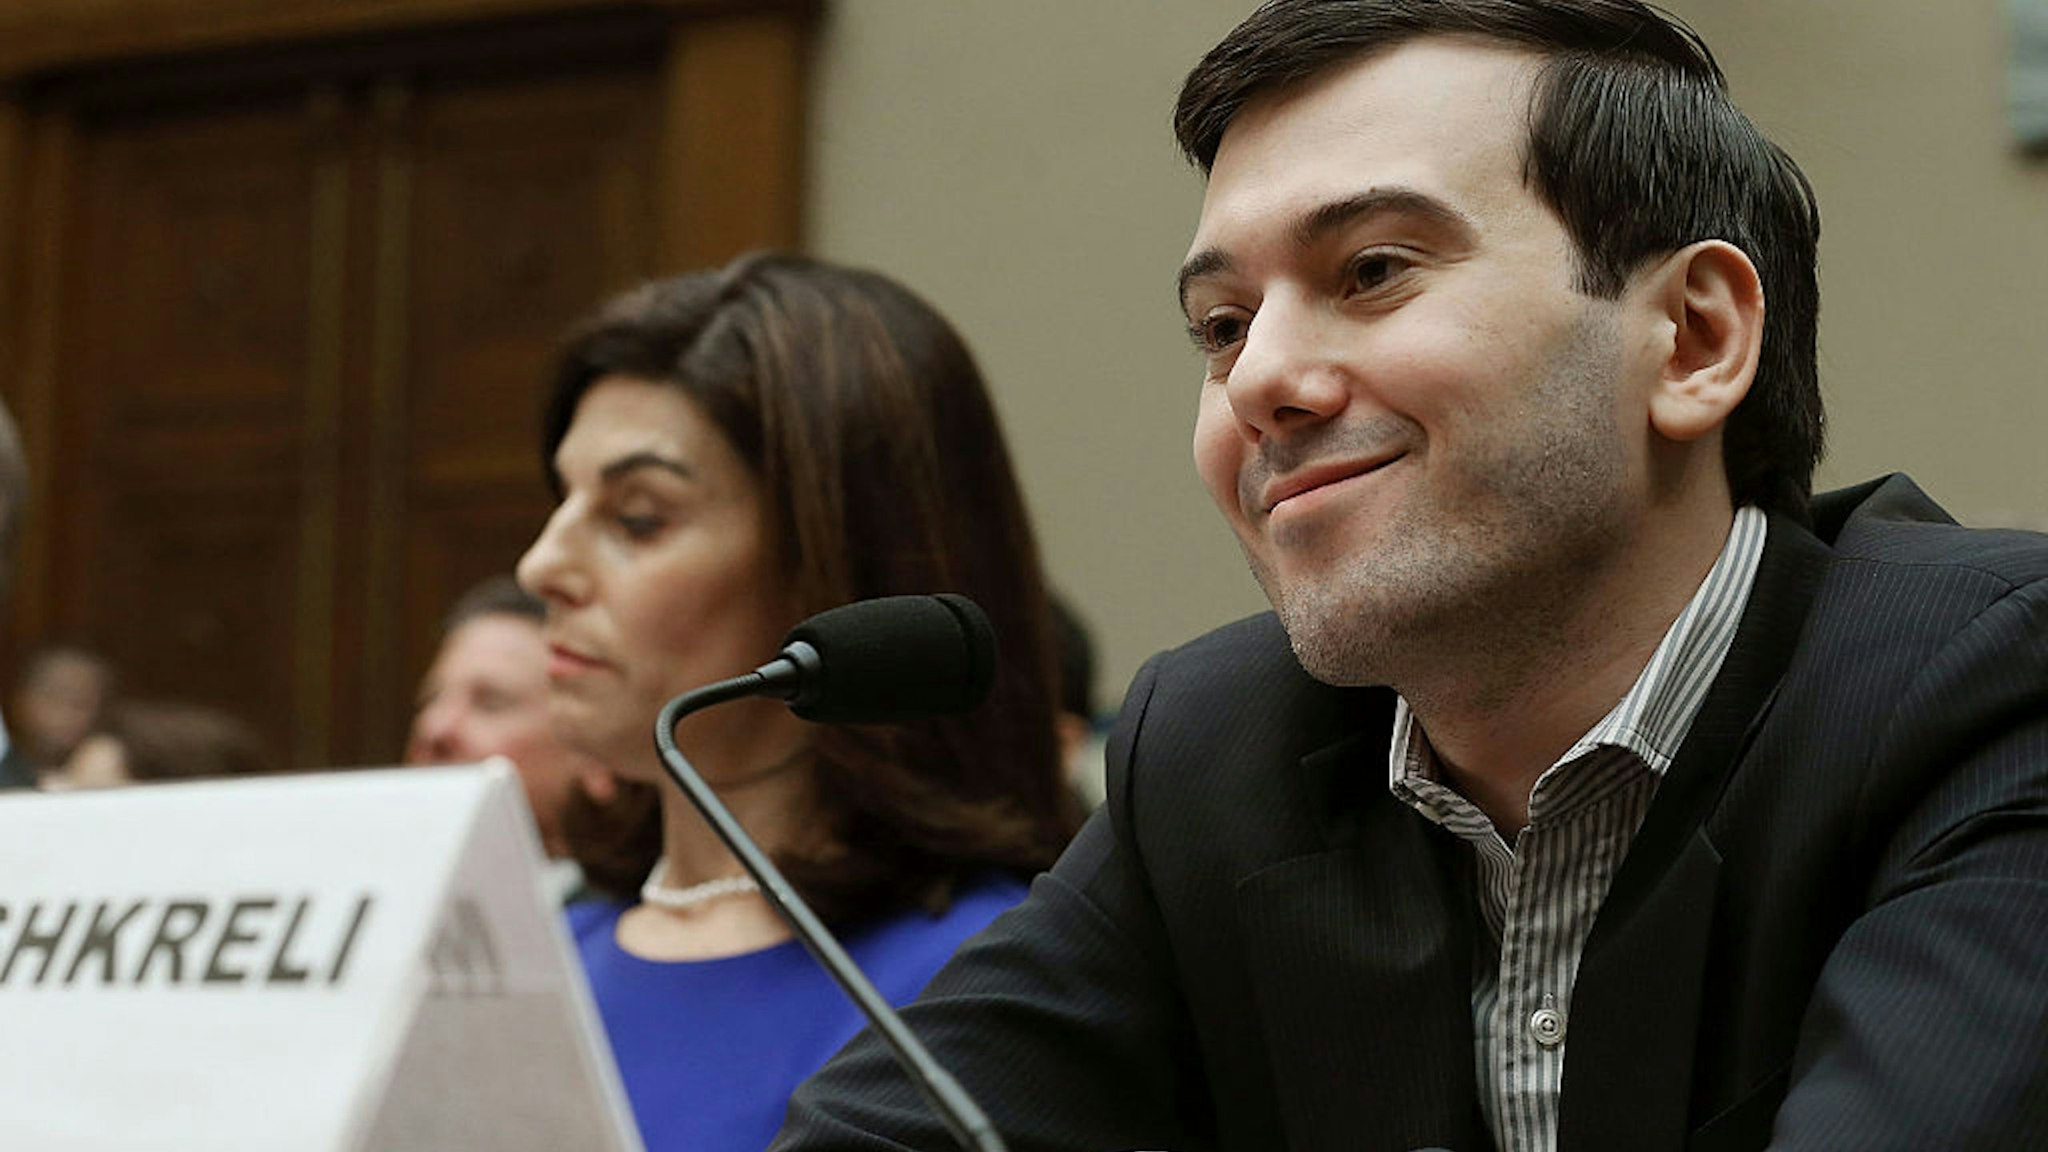 WASHINGTON, DC - FEBRUARY 04: Martin Shkreli, former CEO of Turing Pharmaceuticals LLC., smiles while flanked by Nancy Retzlaff, chief commercial officer for Turing Pharmaceuticals LLC., during a House Oversight and Government Reform Committee hearing on Capitol Hill, February 4, 2016 in Washington, DC. Mr. Shkreli invoked his 5th Amendment right not to testify to the committee that is examining the prescription drug market.